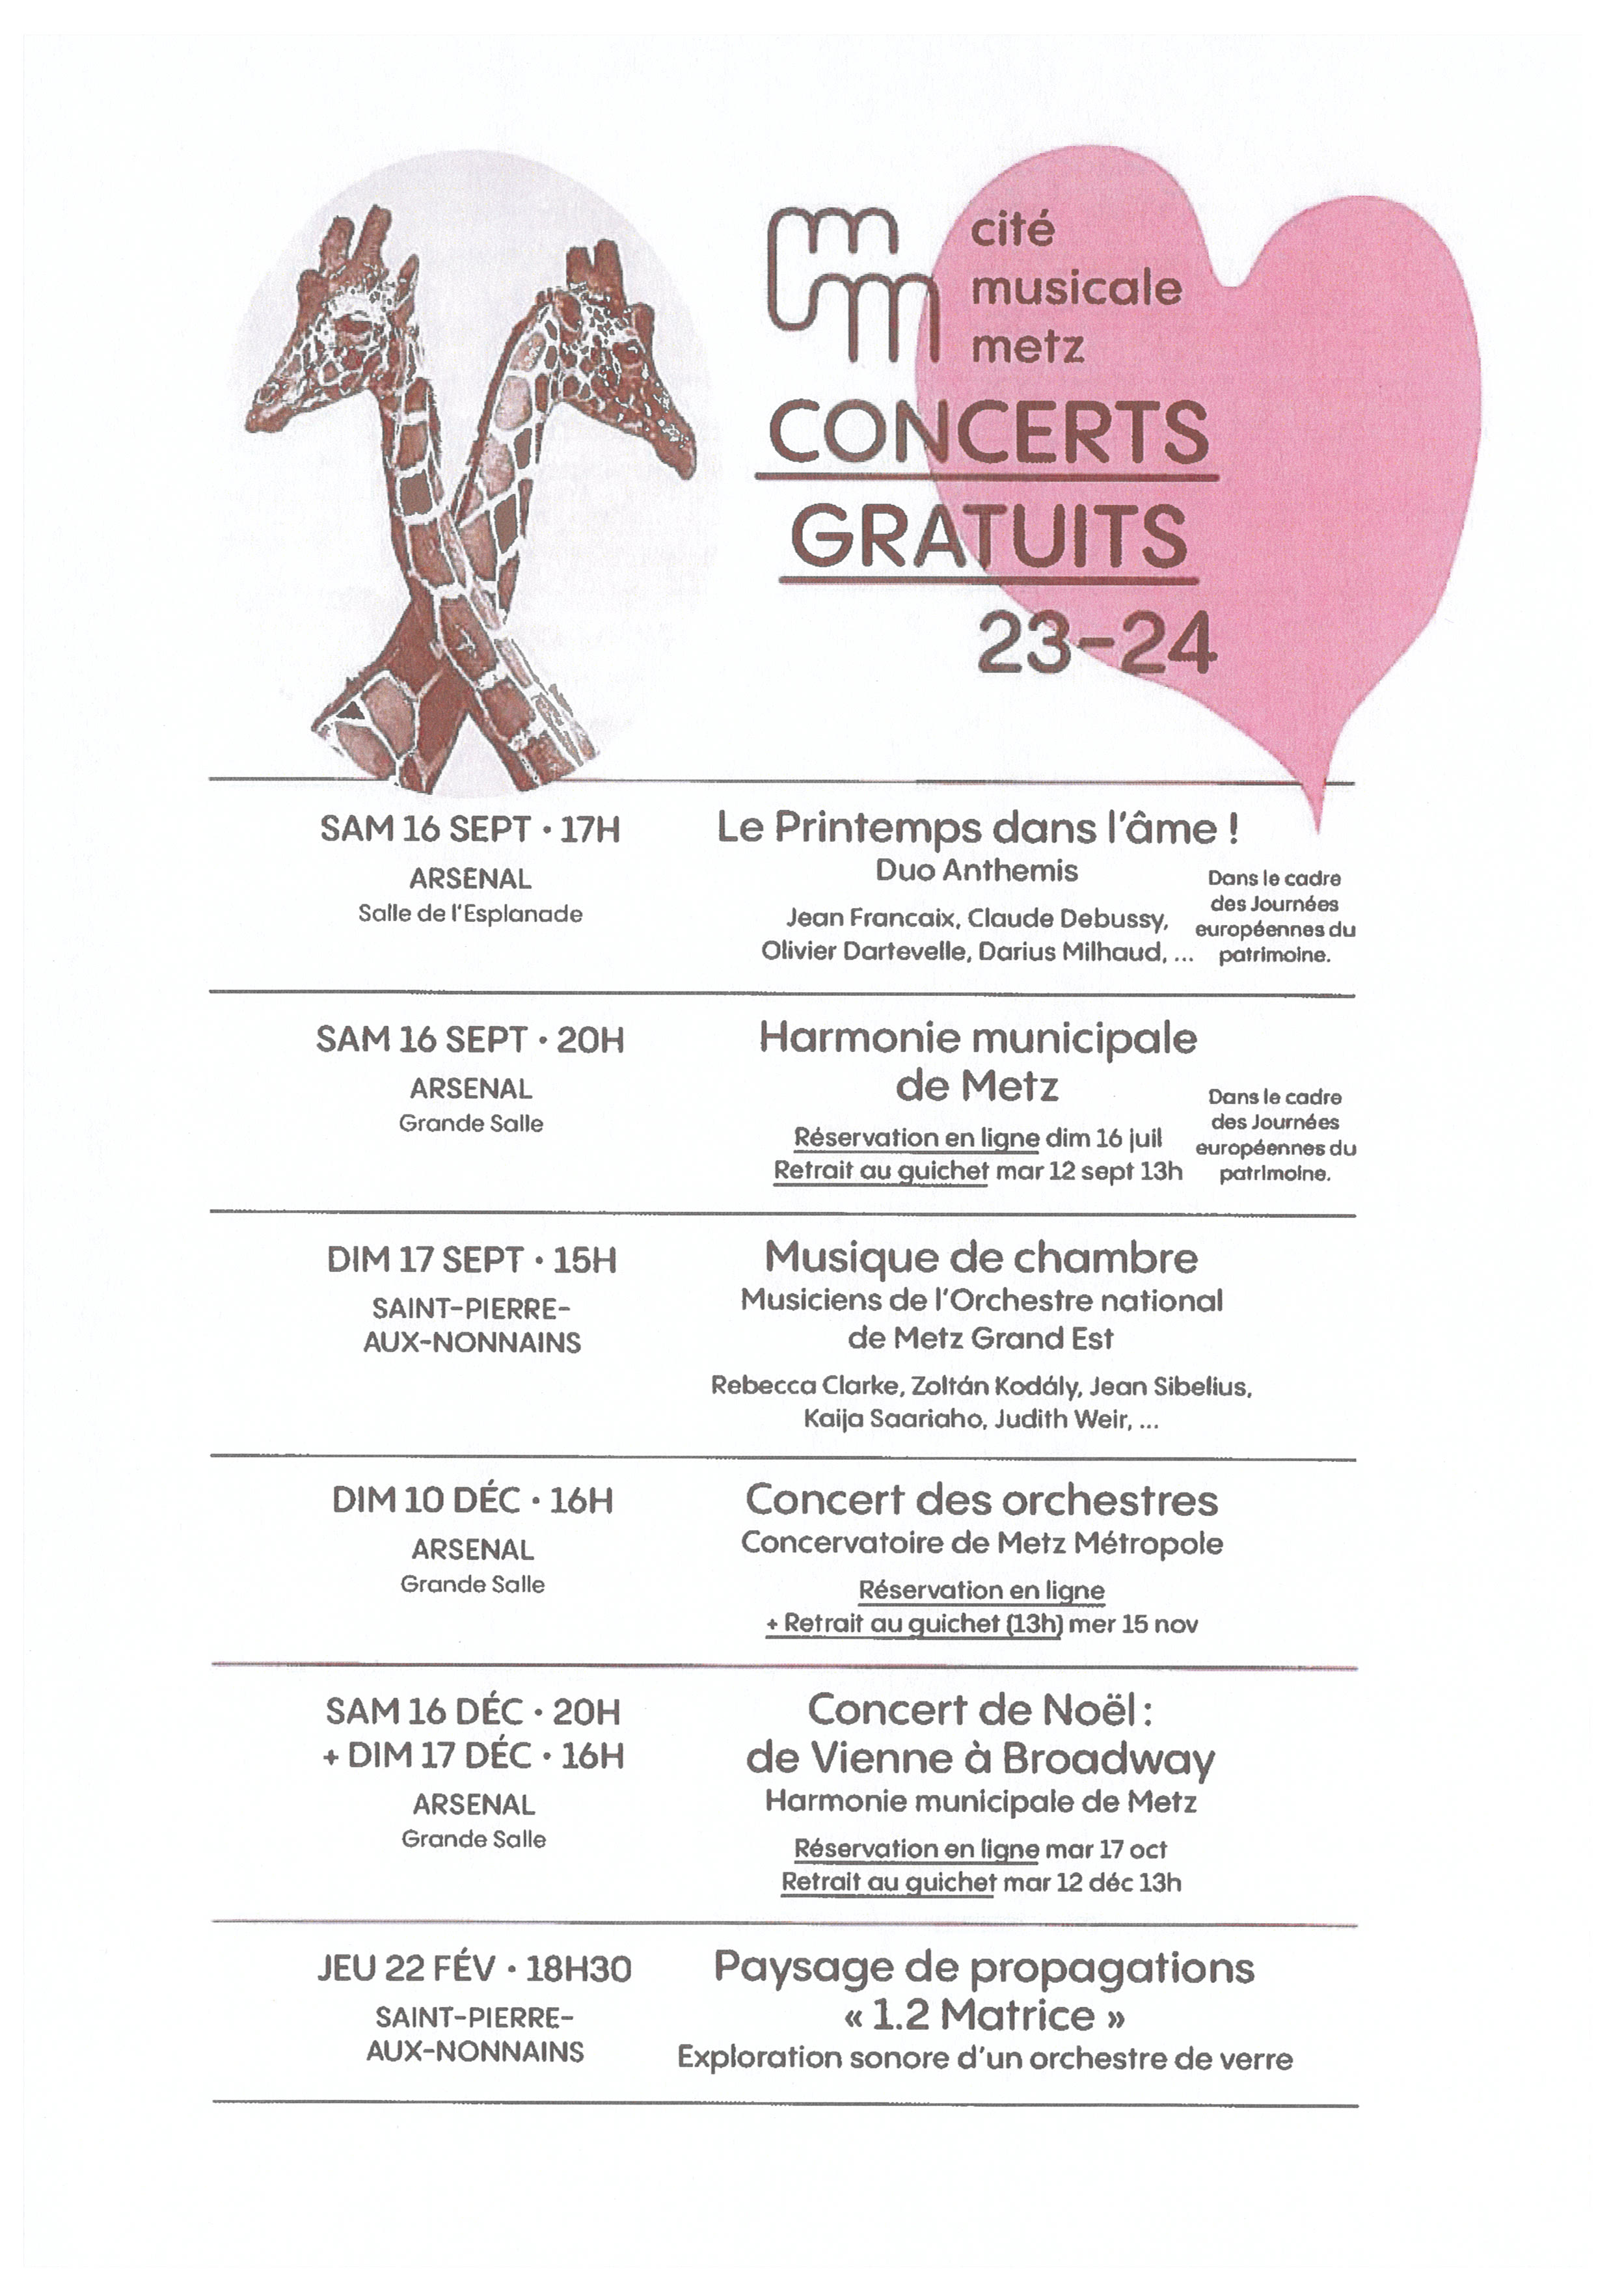 Concert of orchestras